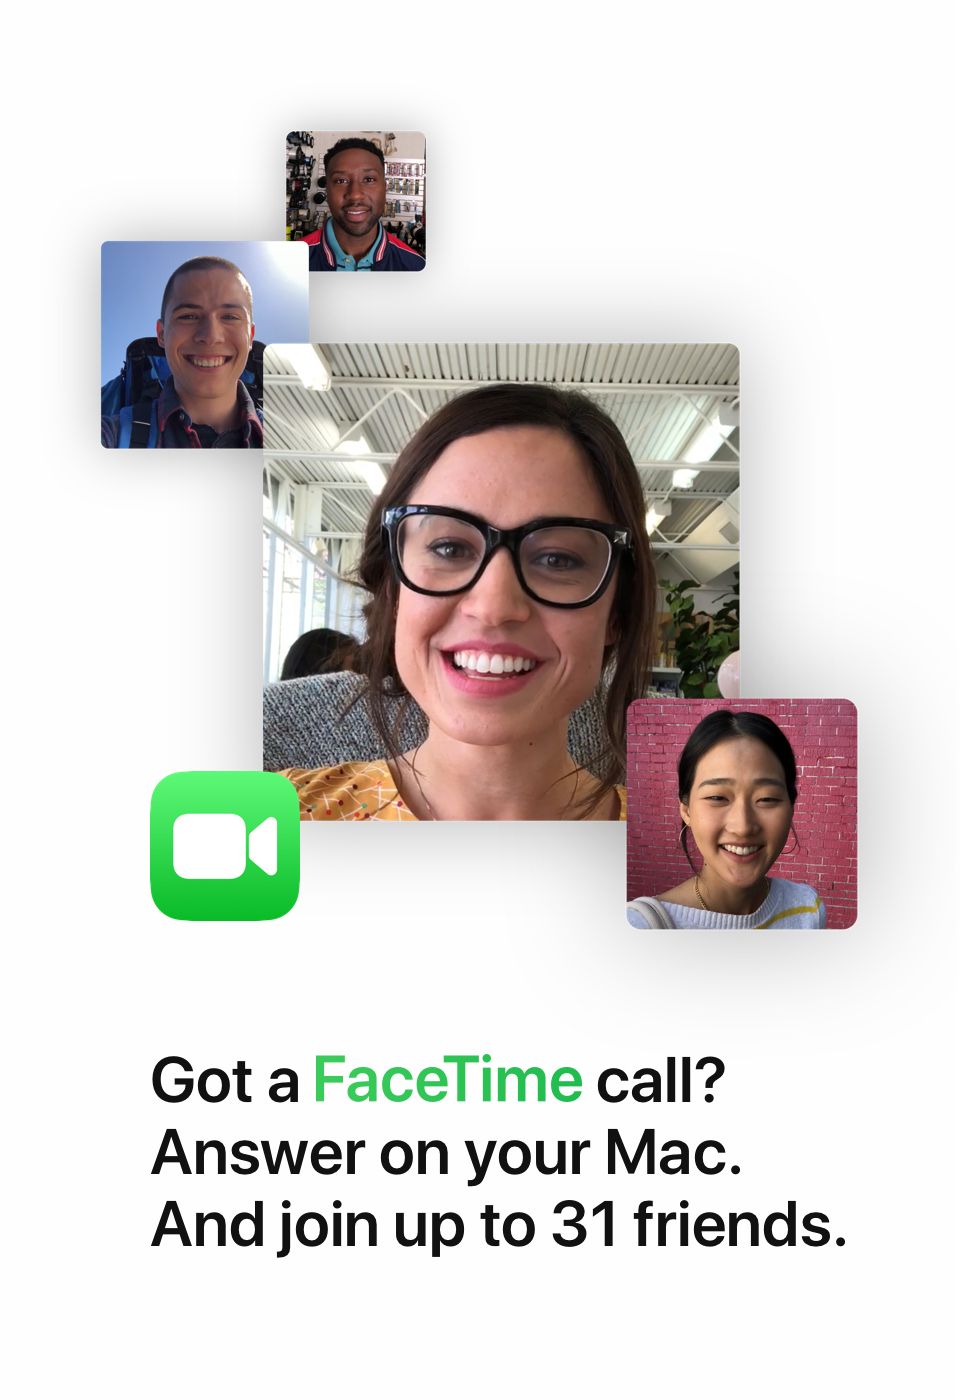 Got a FaceTime call? Answer on your Mac. And join up to 31 Friends